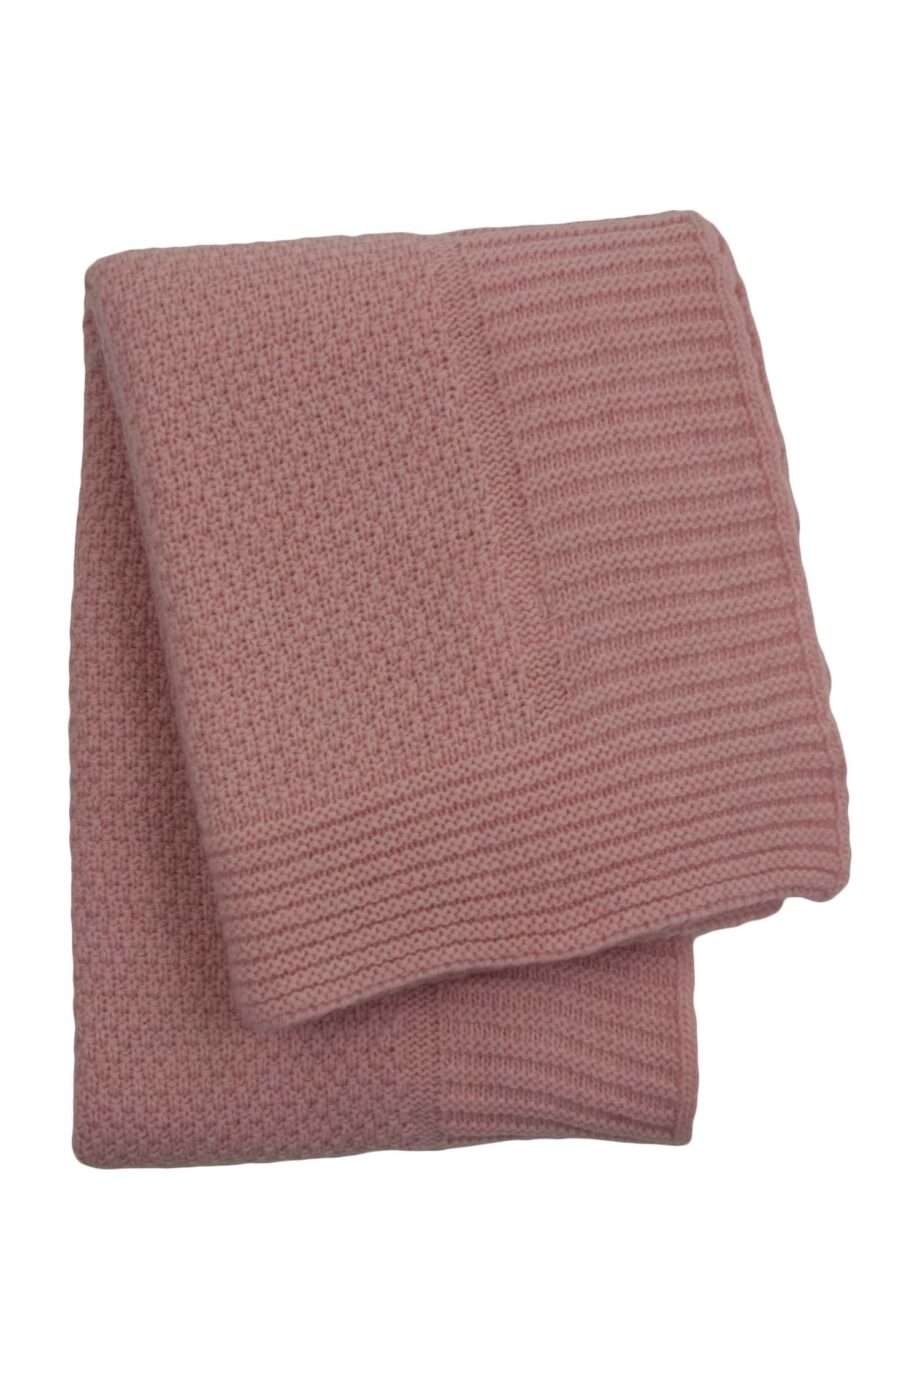 rice baby pink knitted woolen little blanket small